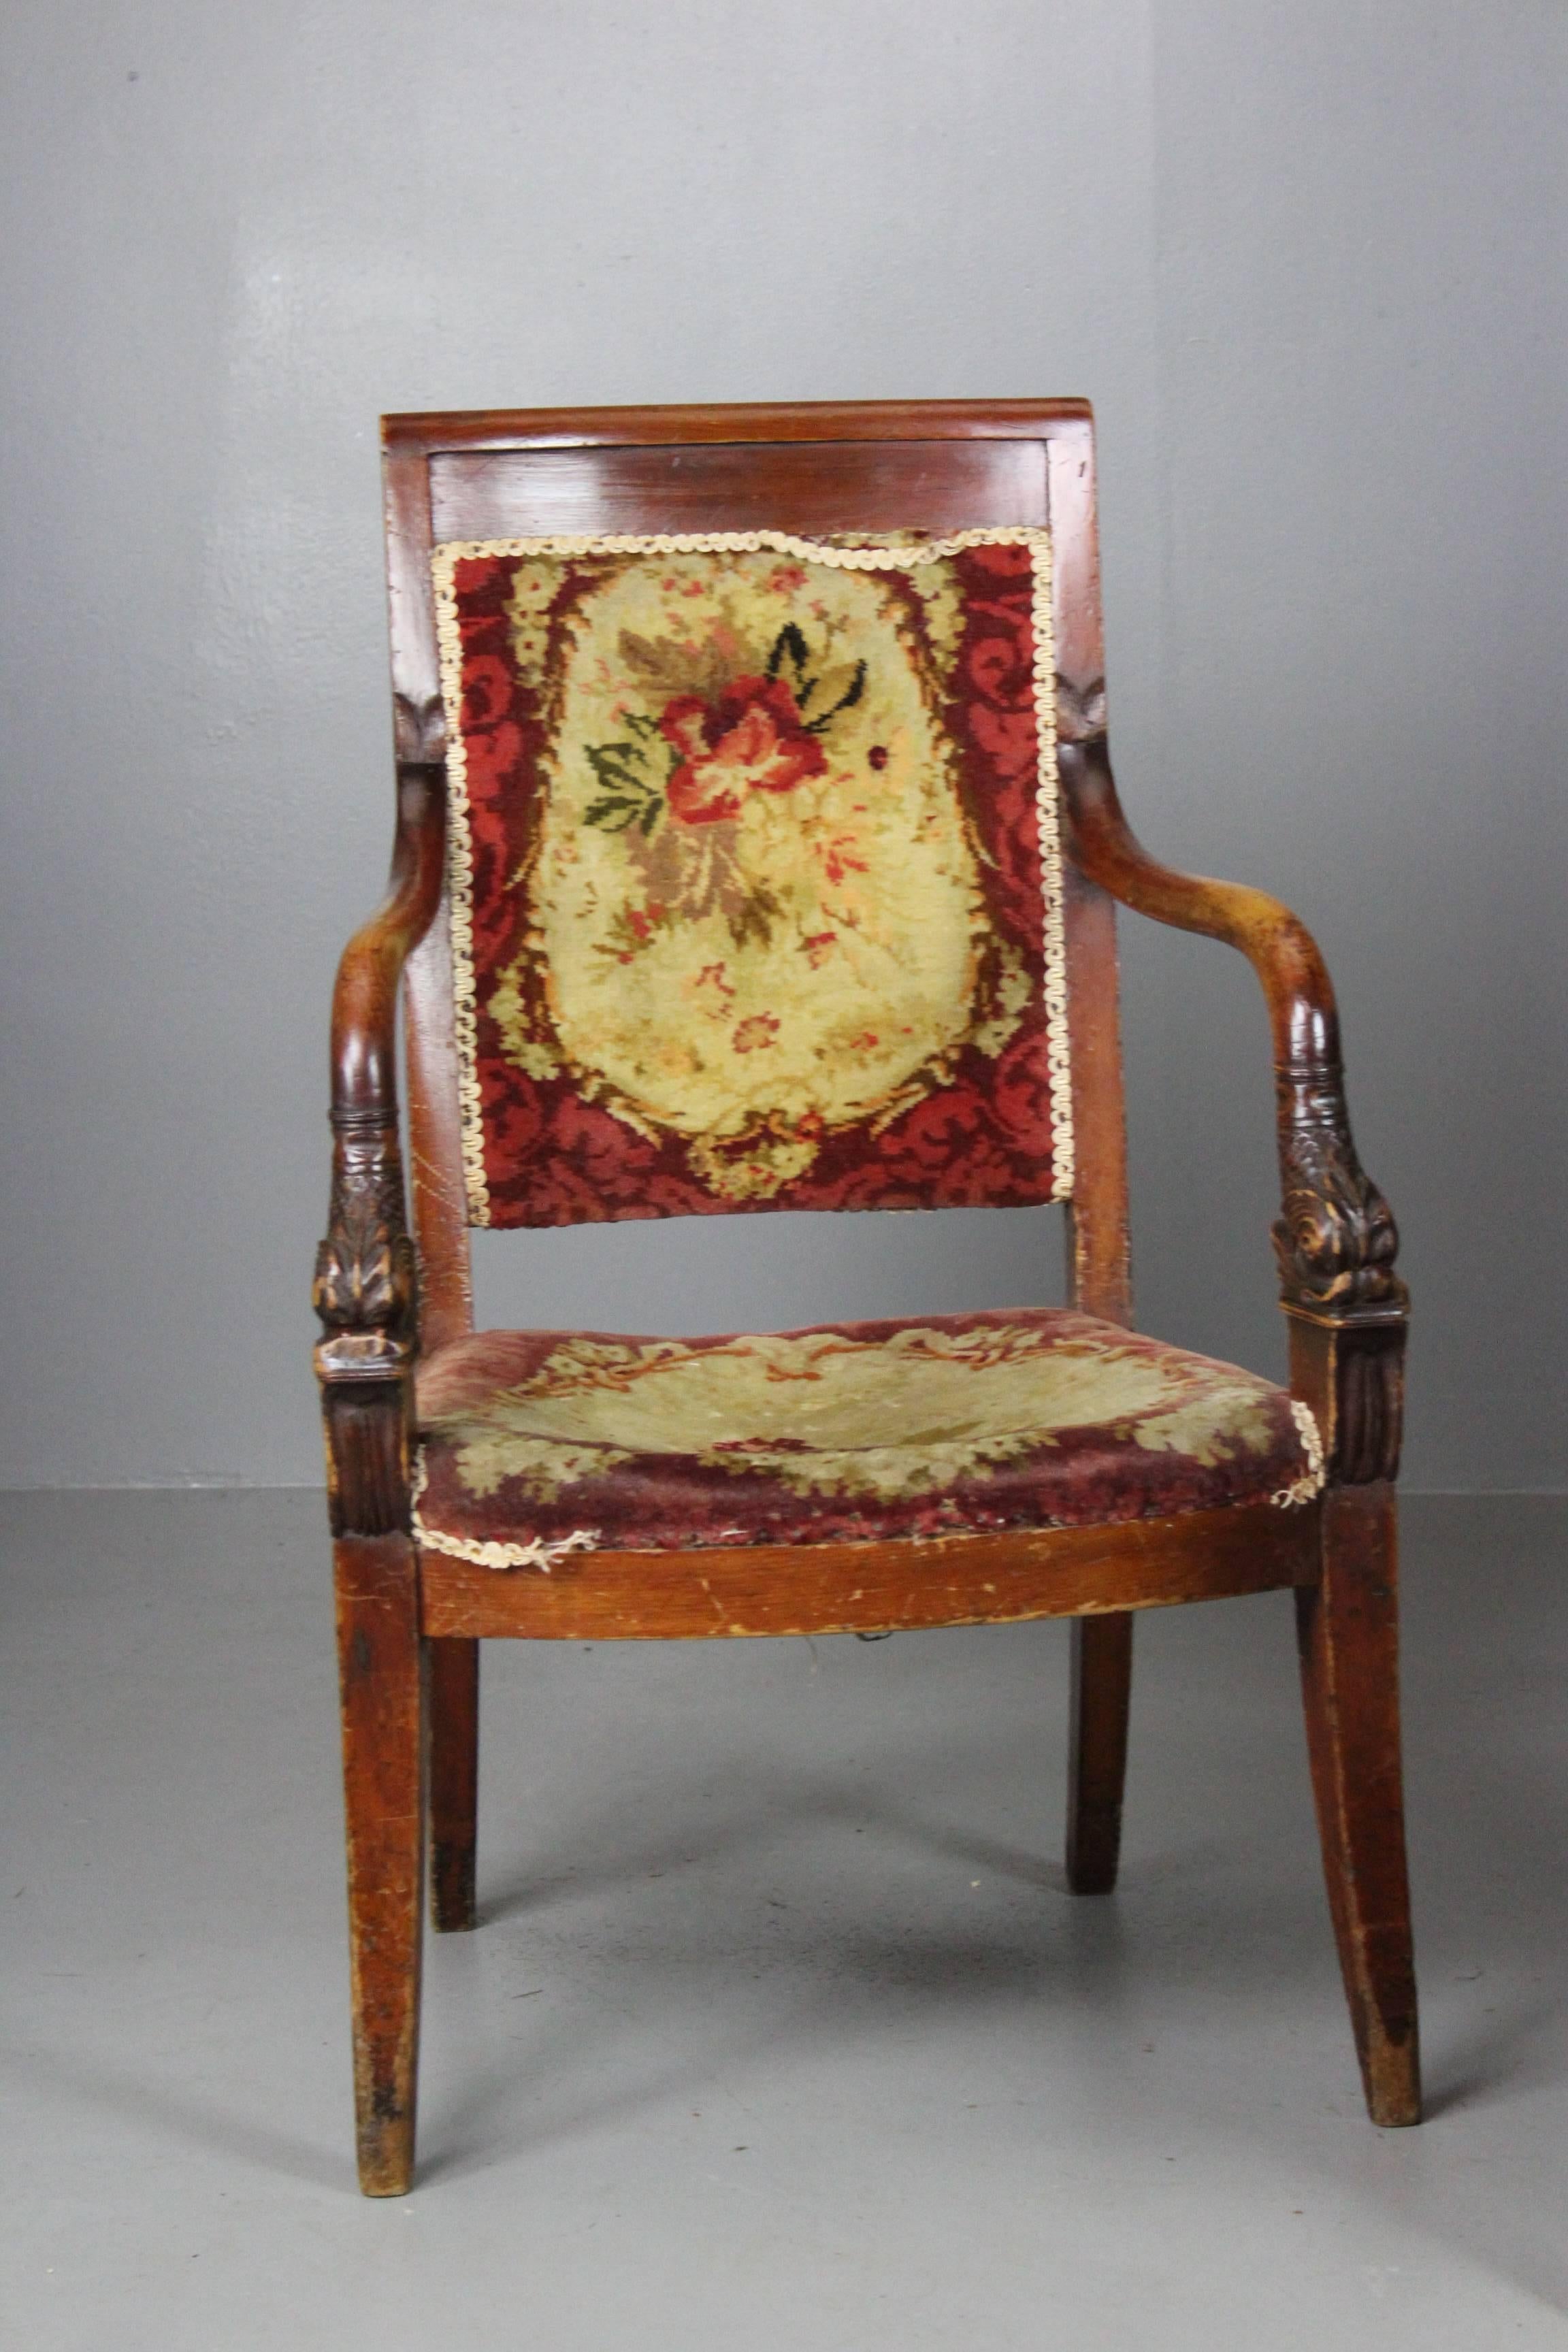 Pair of French chairs. Stunning pair of early 19th century Charles X open-armchairs. Stained pine and beech frame with dolphin arm supports, webbed seat and floral carpet upholstered seat and back on sabre legs.

Please click our logo for more